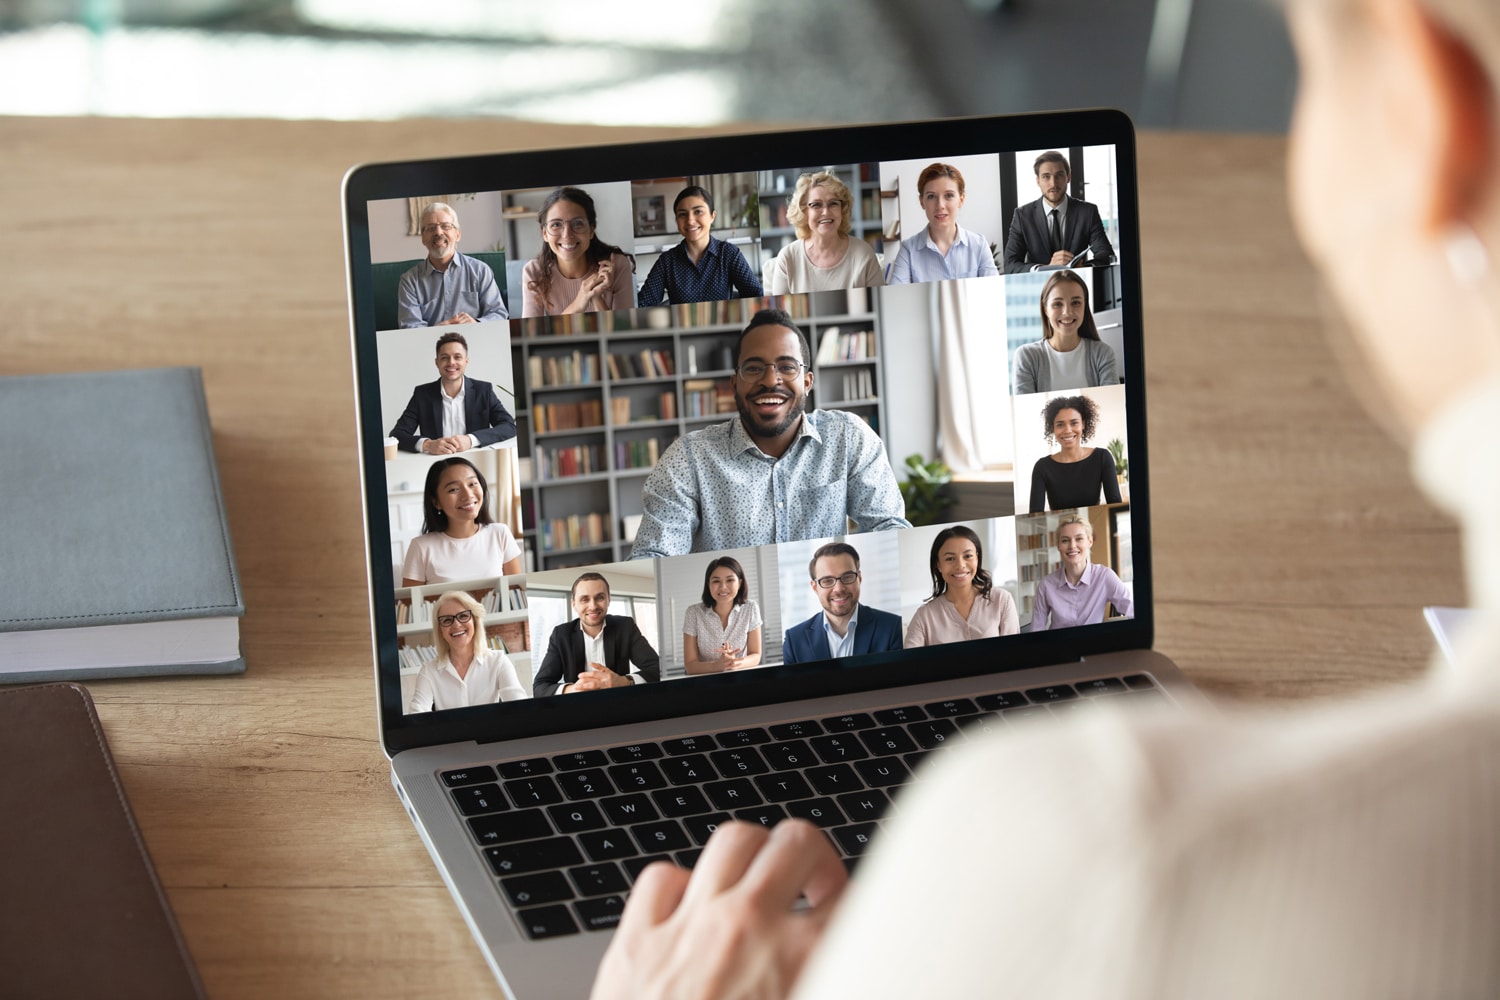 Someone attends a virtual meeting on their laptop at home, the smiling faces of many office colleagues on the screen